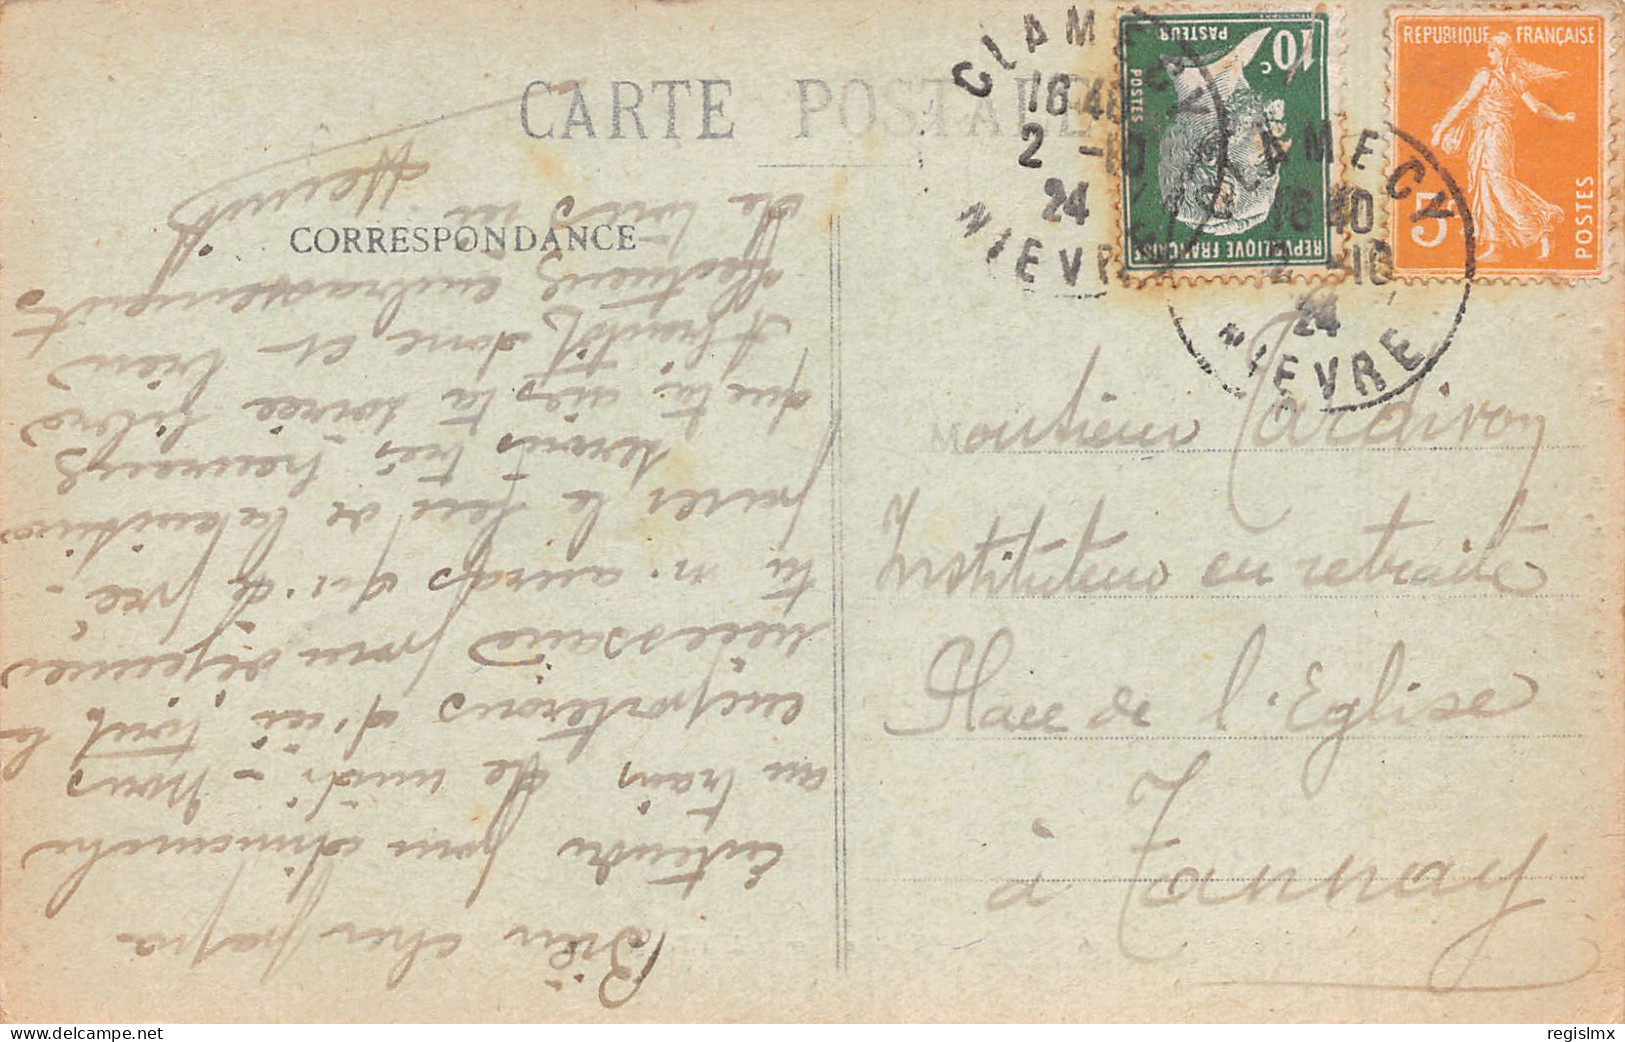 58-CLAMECY-N°T2539-G/0093 - Clamecy